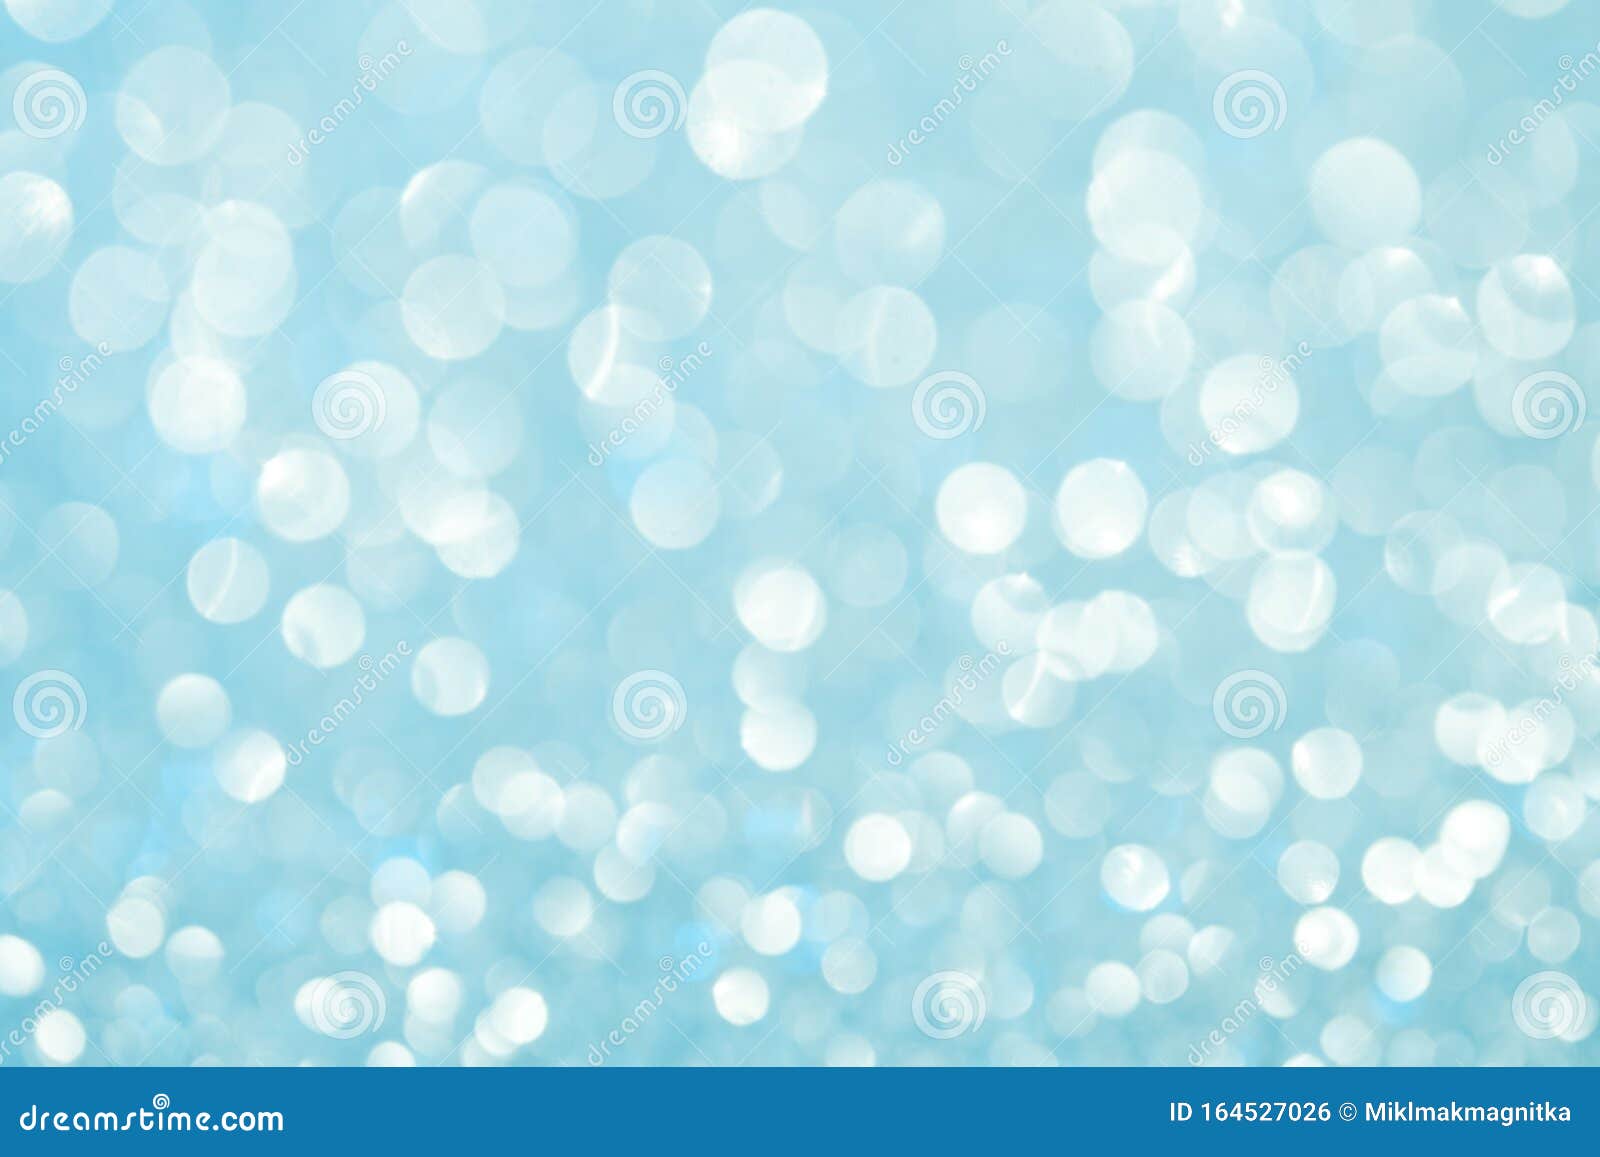 winter christmas morning. defocus abstract show. gentle blue morning festive lights. bright background and backdrop